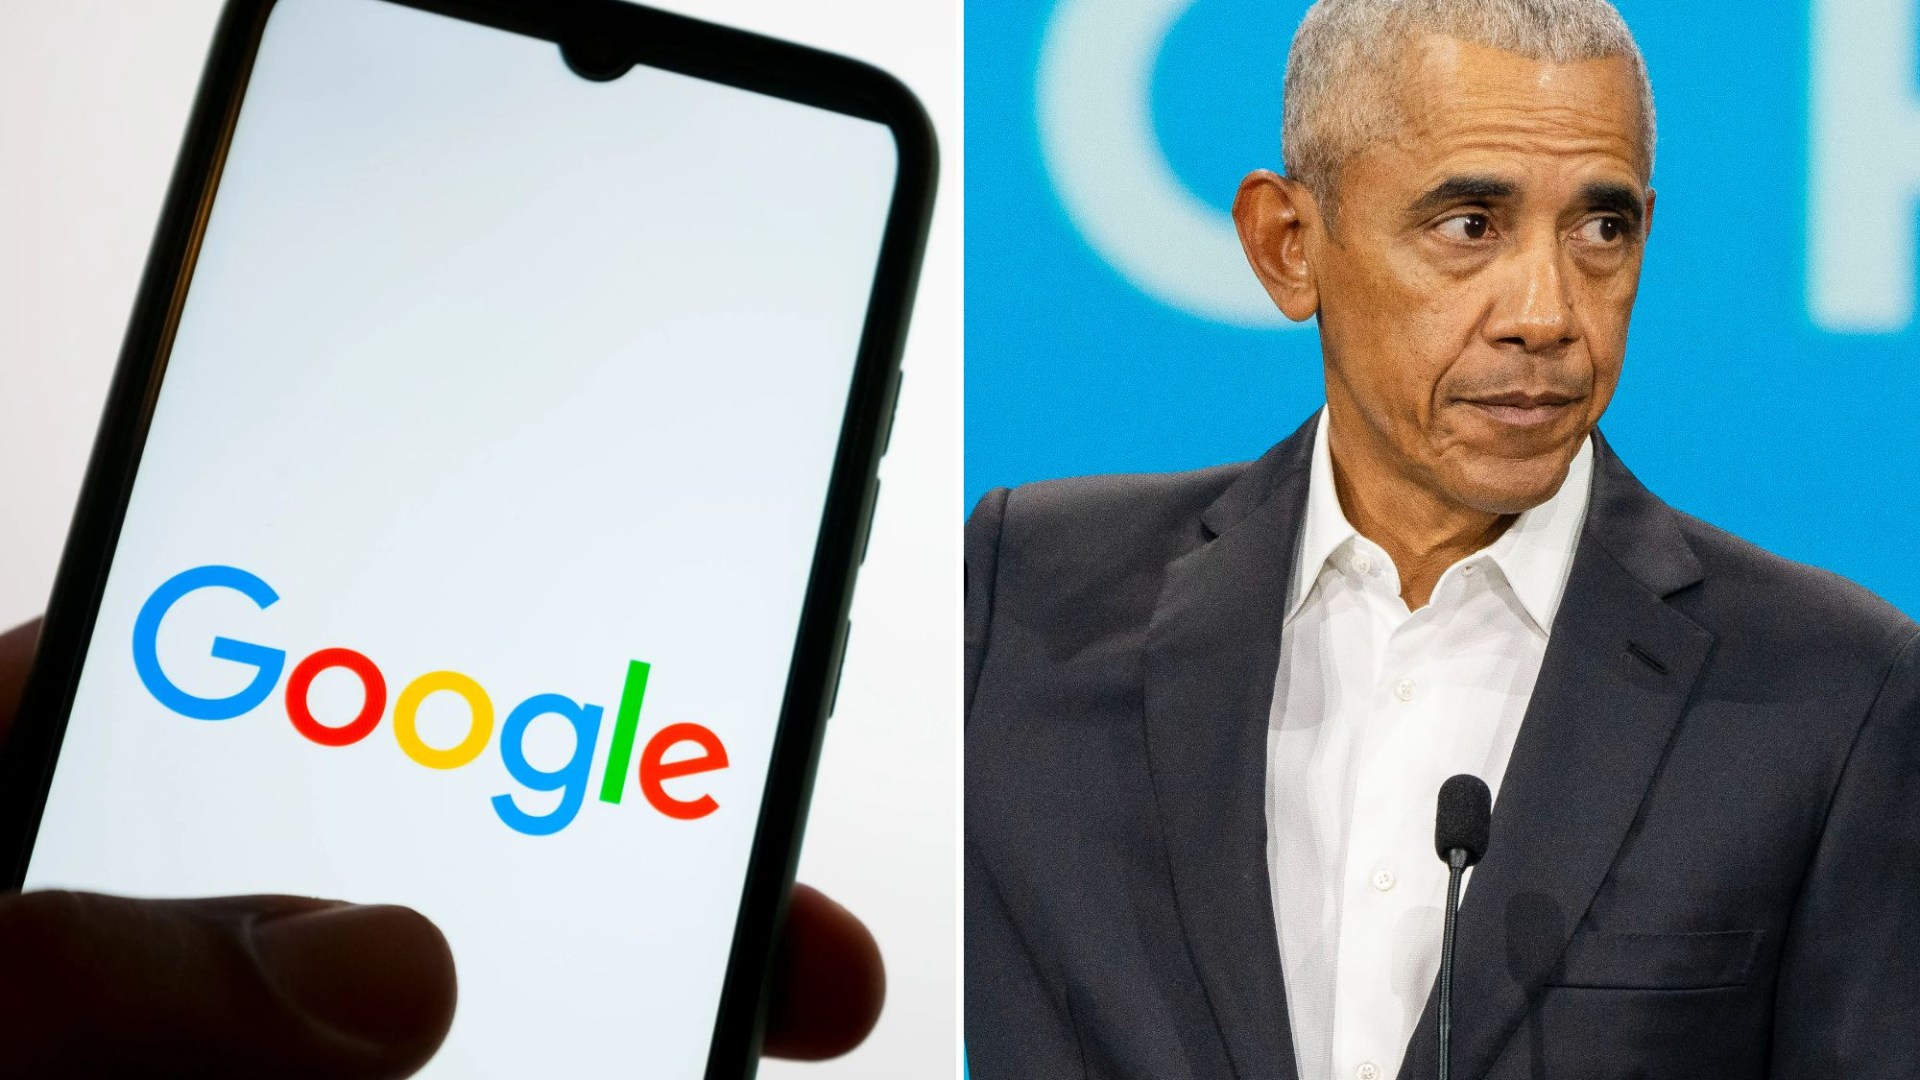 Fury over ‘dumb’ Google AI as search spews incorrect results claiming Barack Obama was America’s first Muslim president [Video]